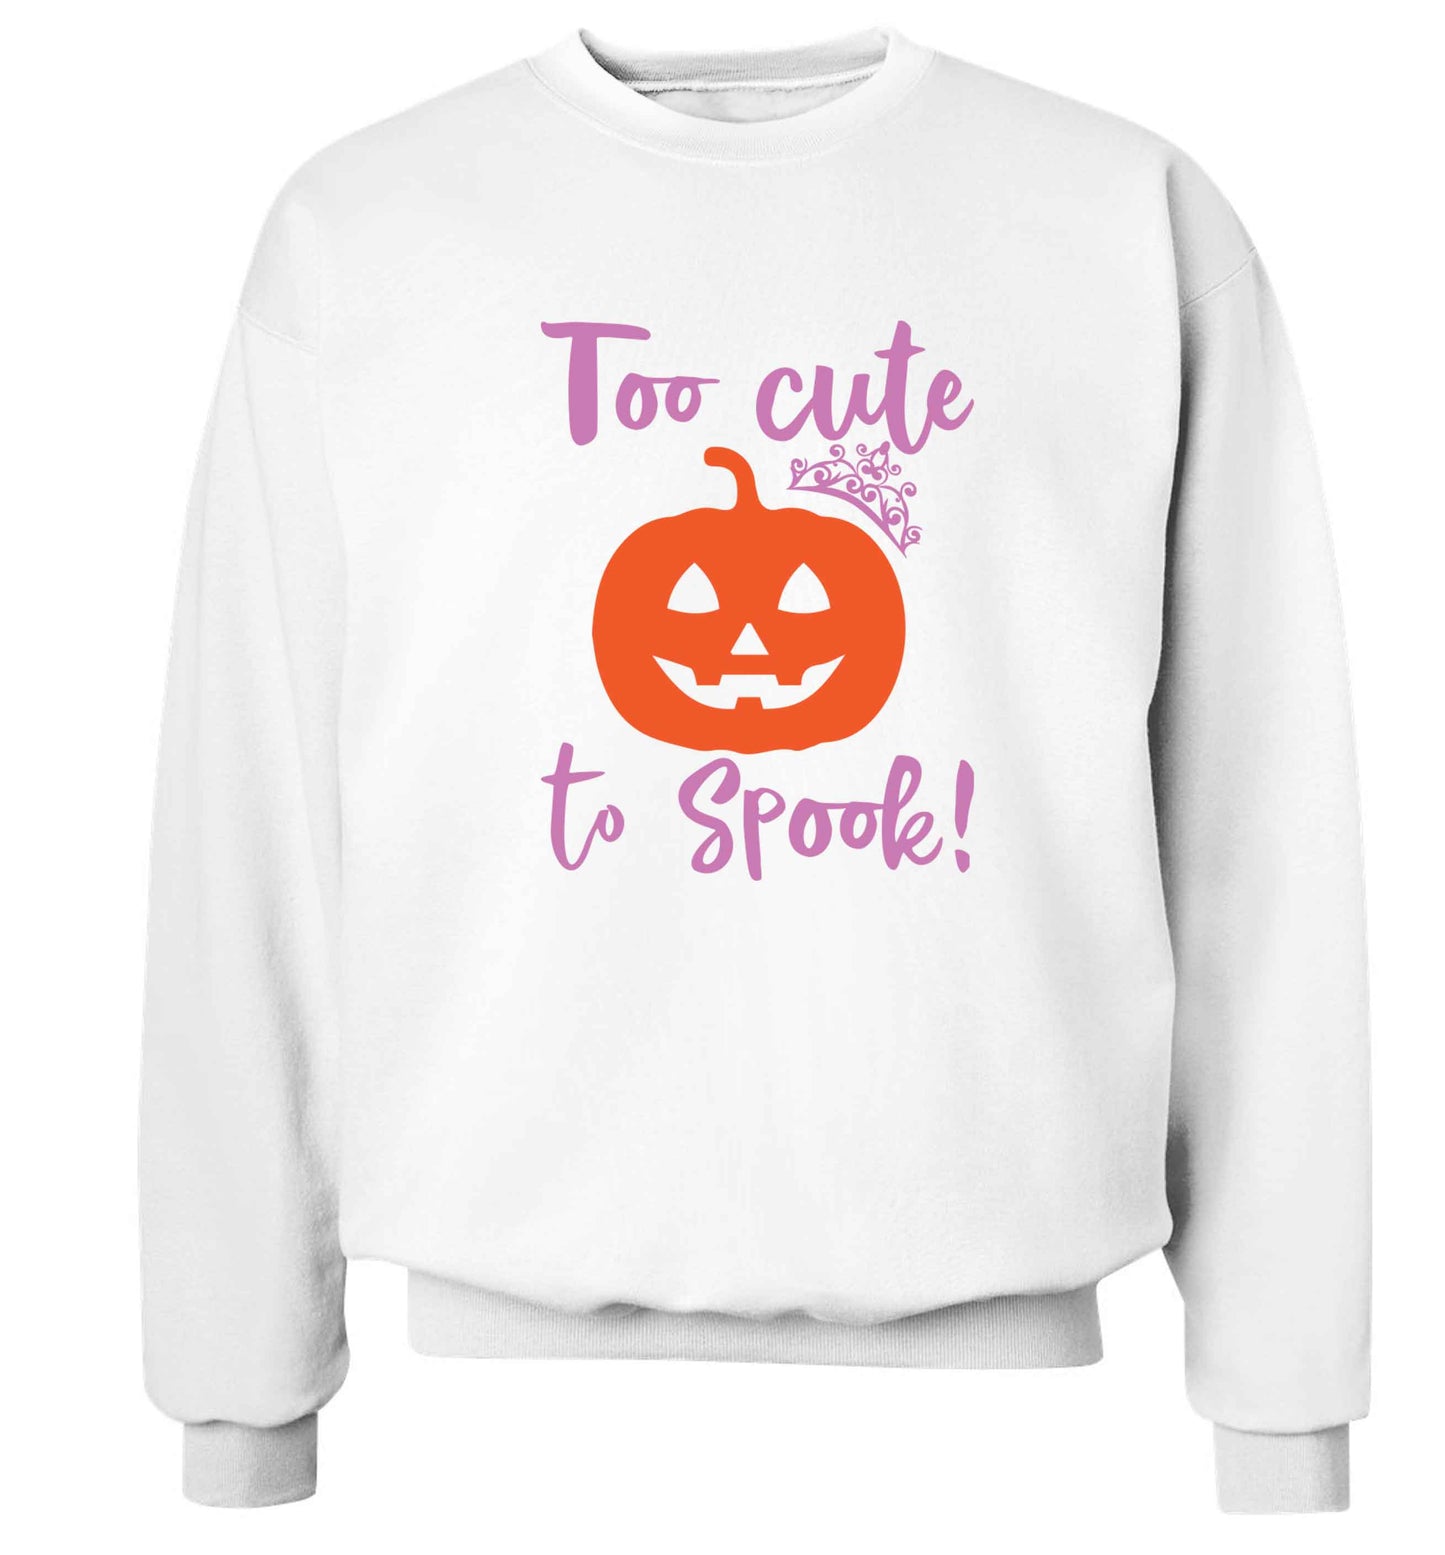 Too cute to spook! Adult's unisex white Sweater 2XL